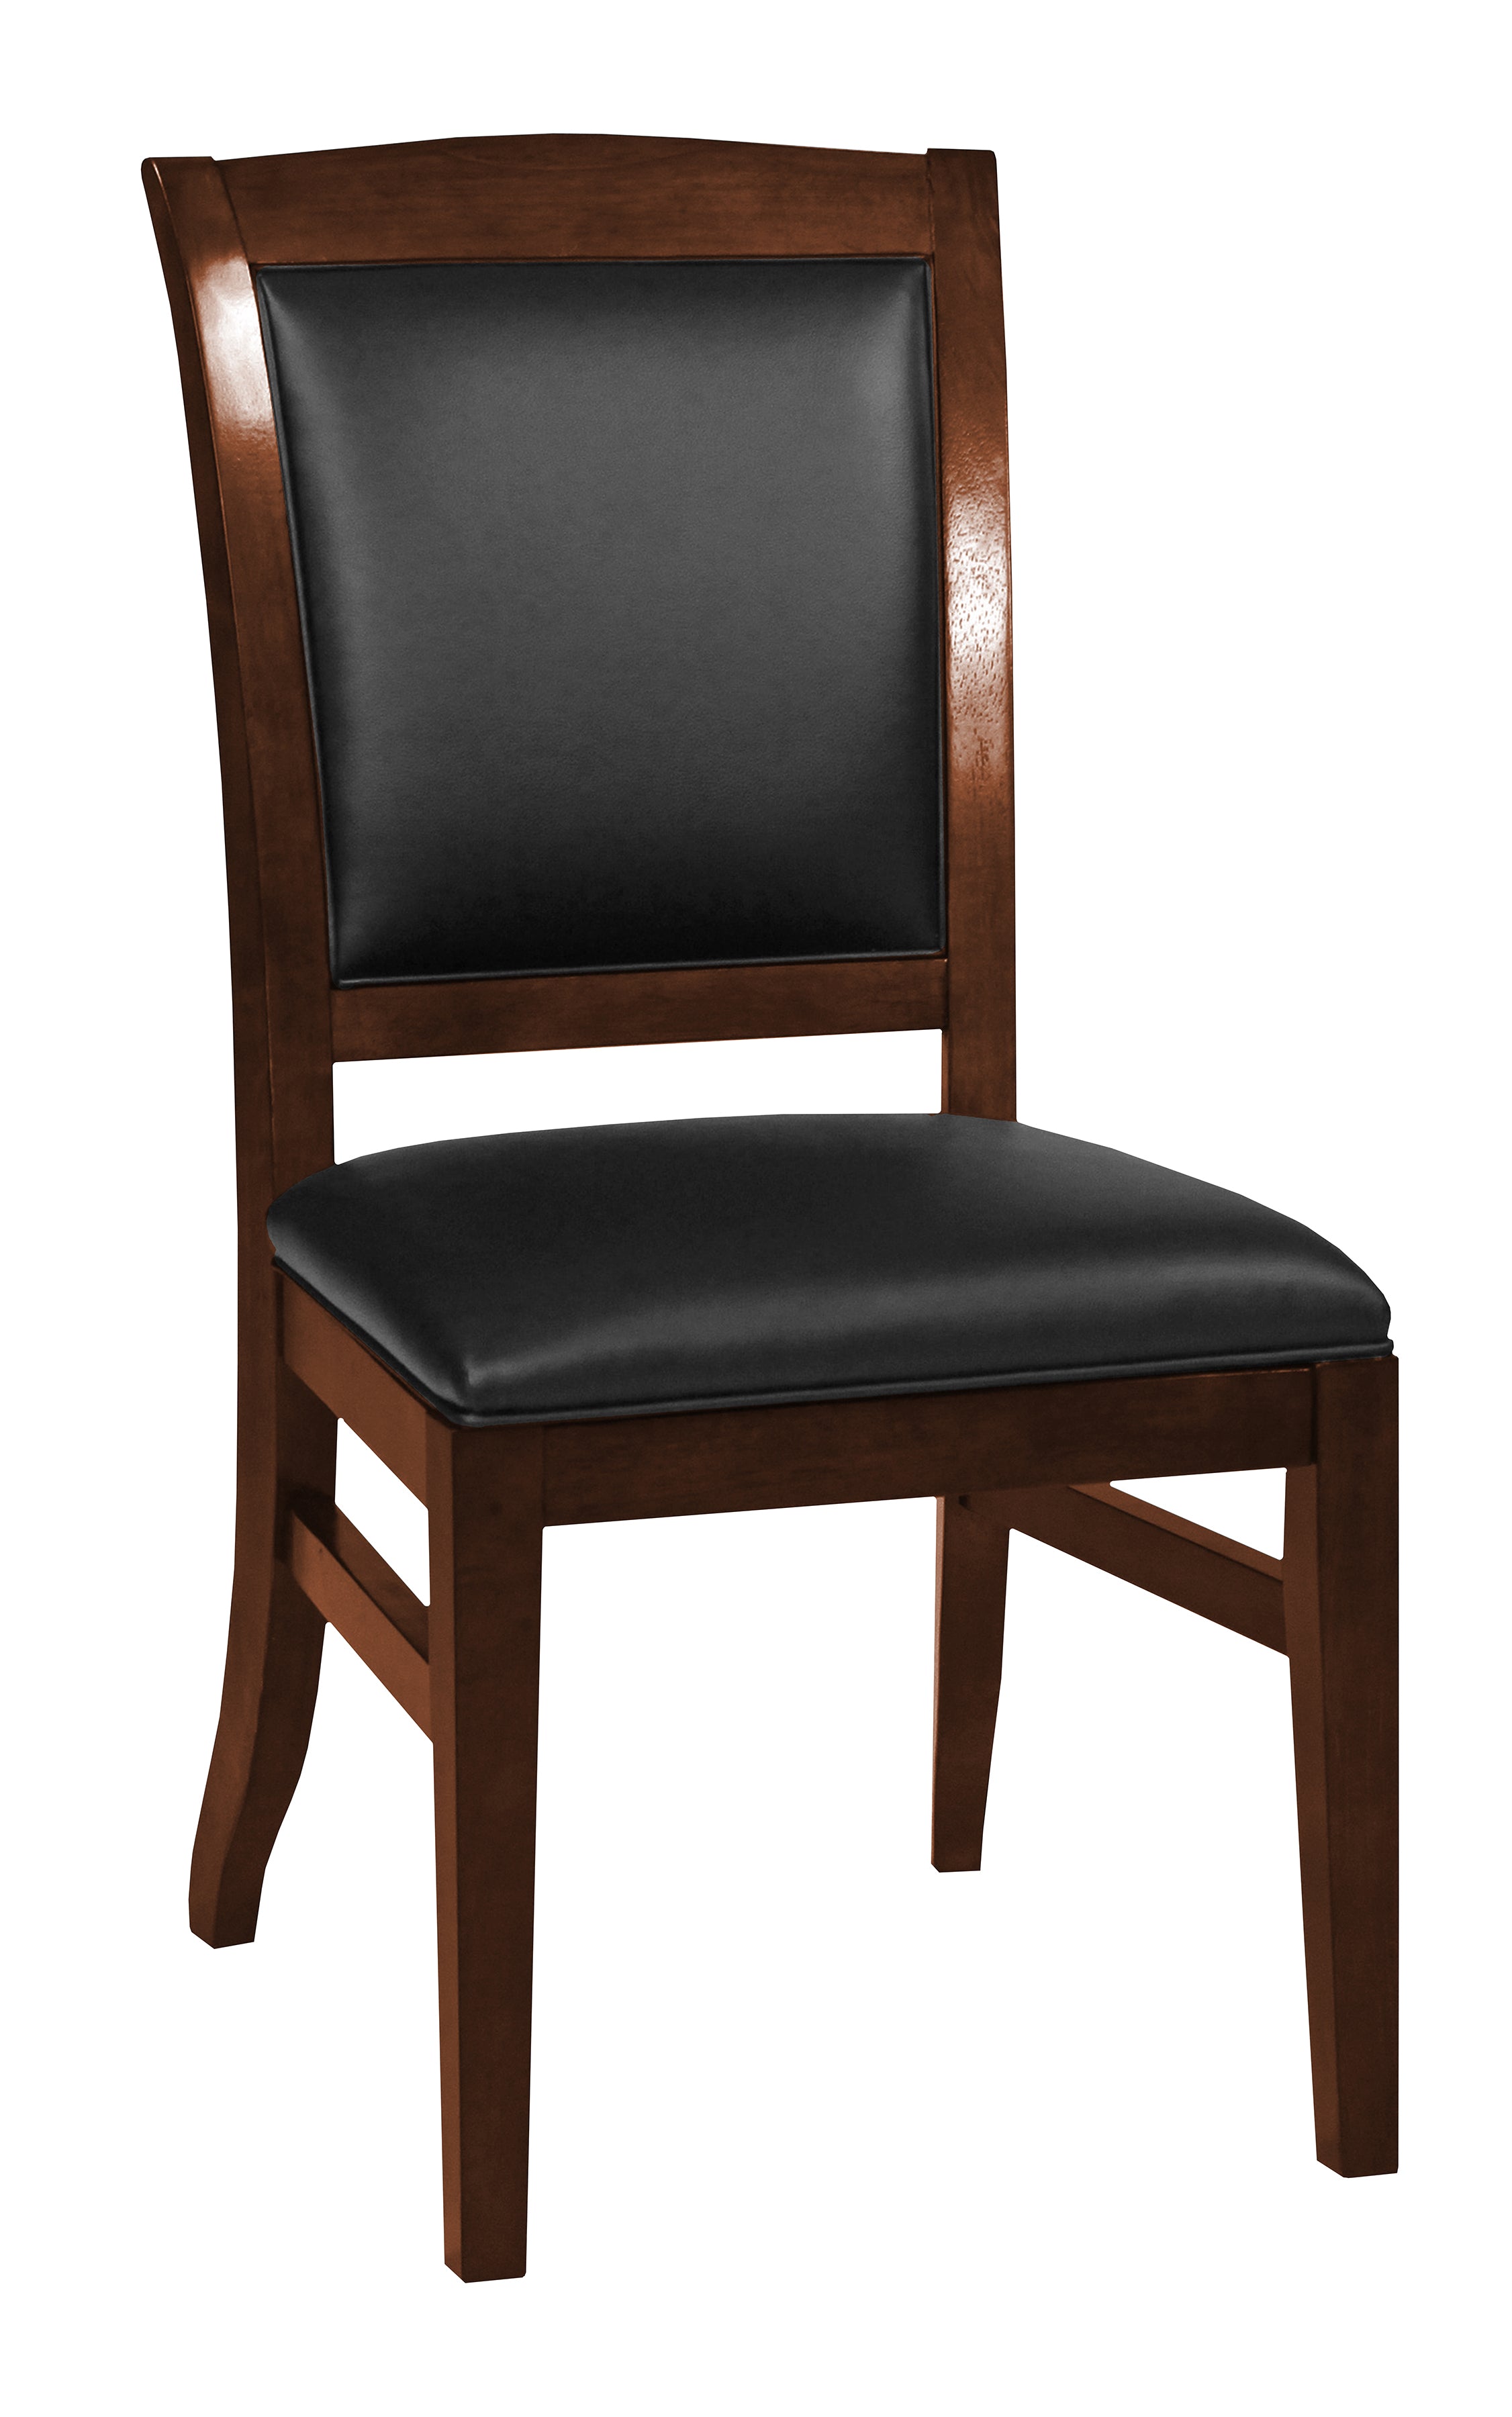 Legacy Billiards Heritage Dining Game Chair in Nutmeg Finish